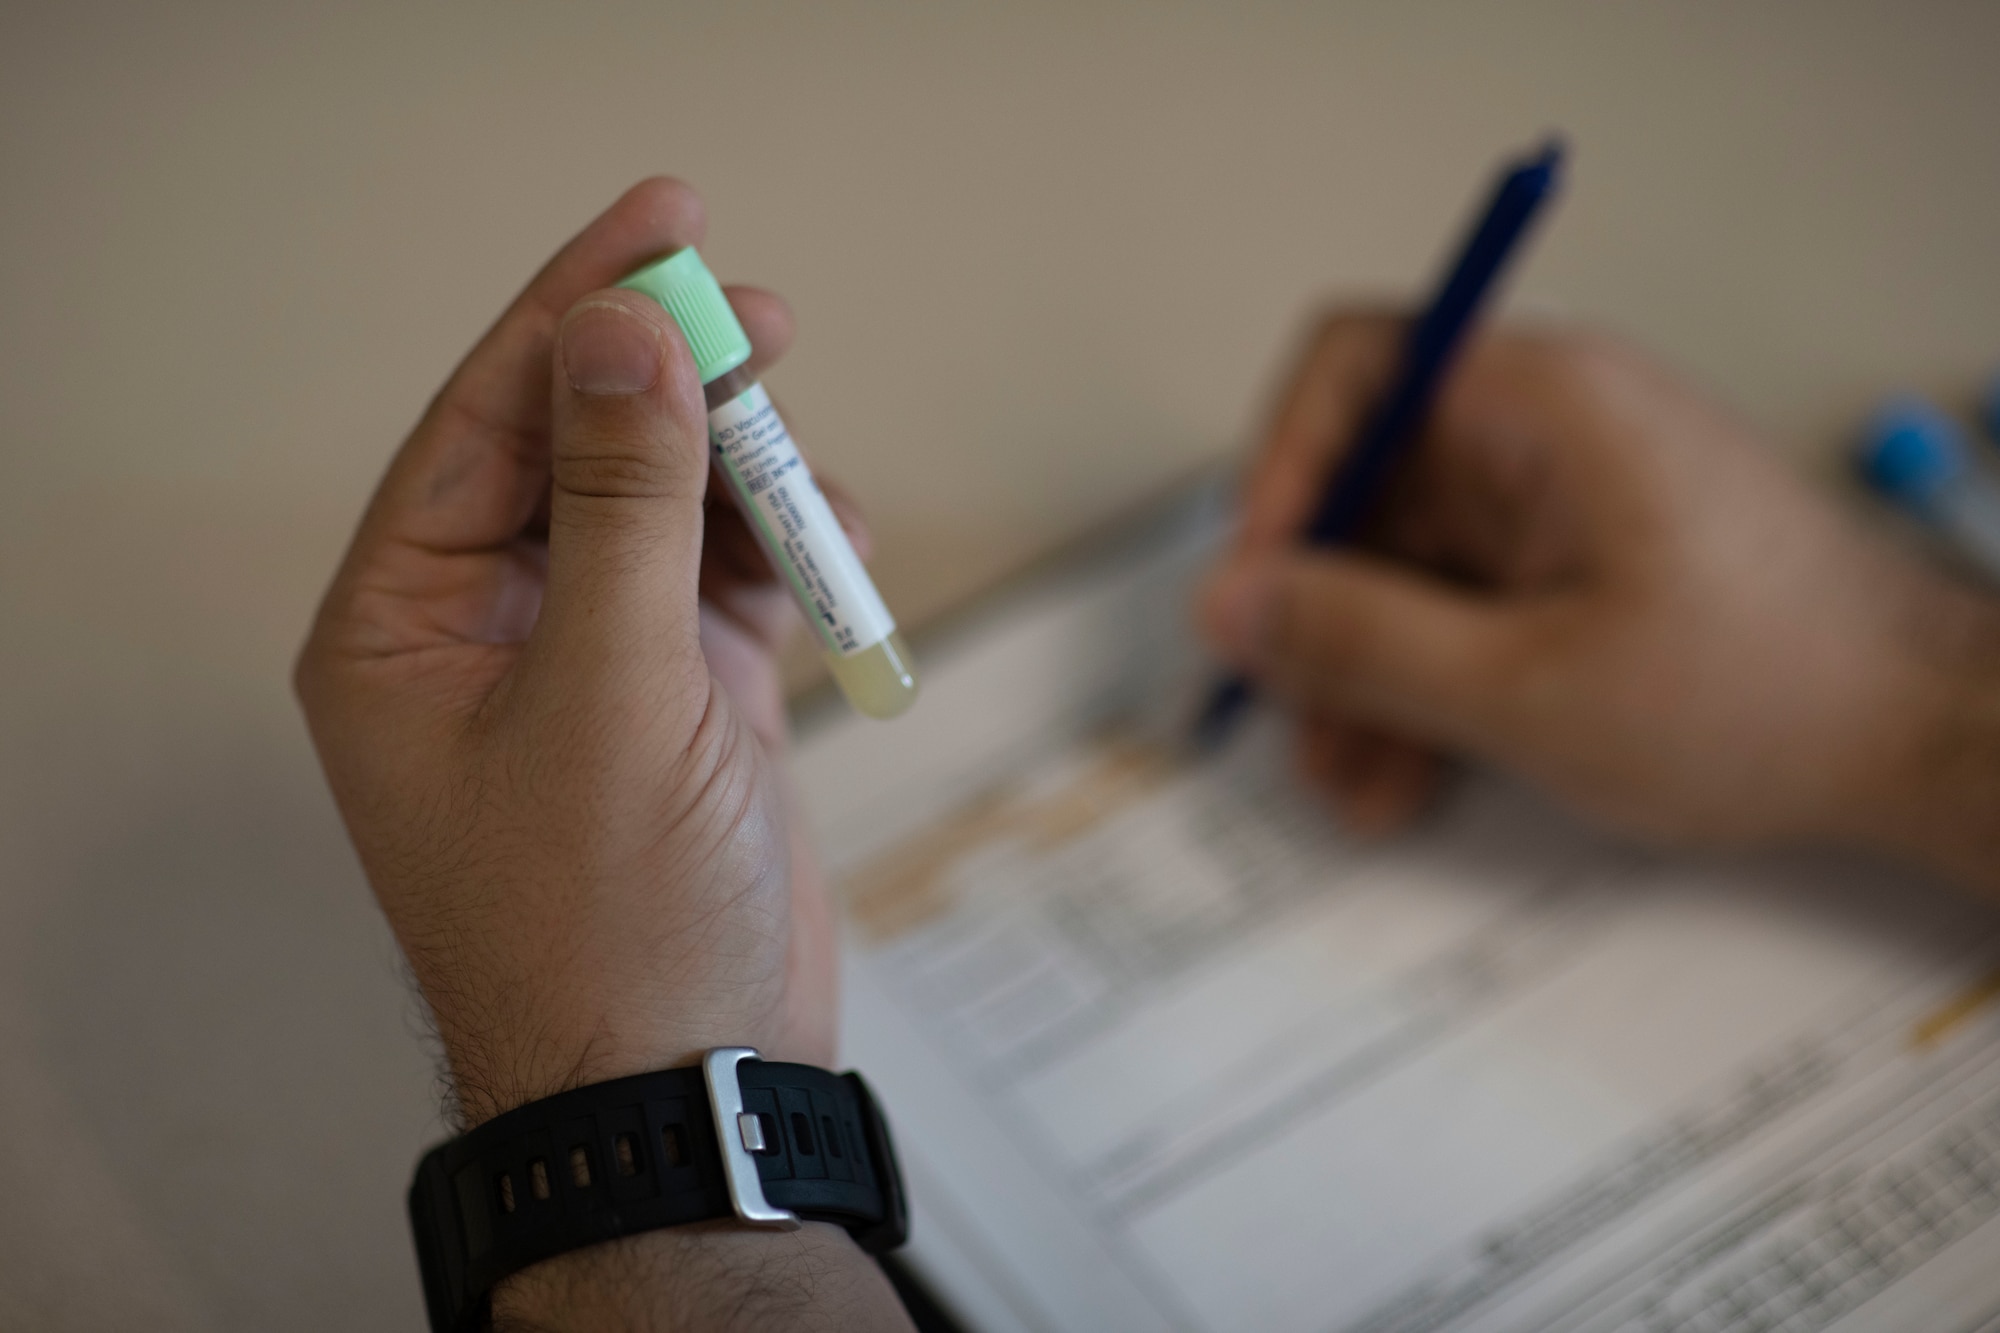 A servicemember holds up a blood work vile as he completes paperwork